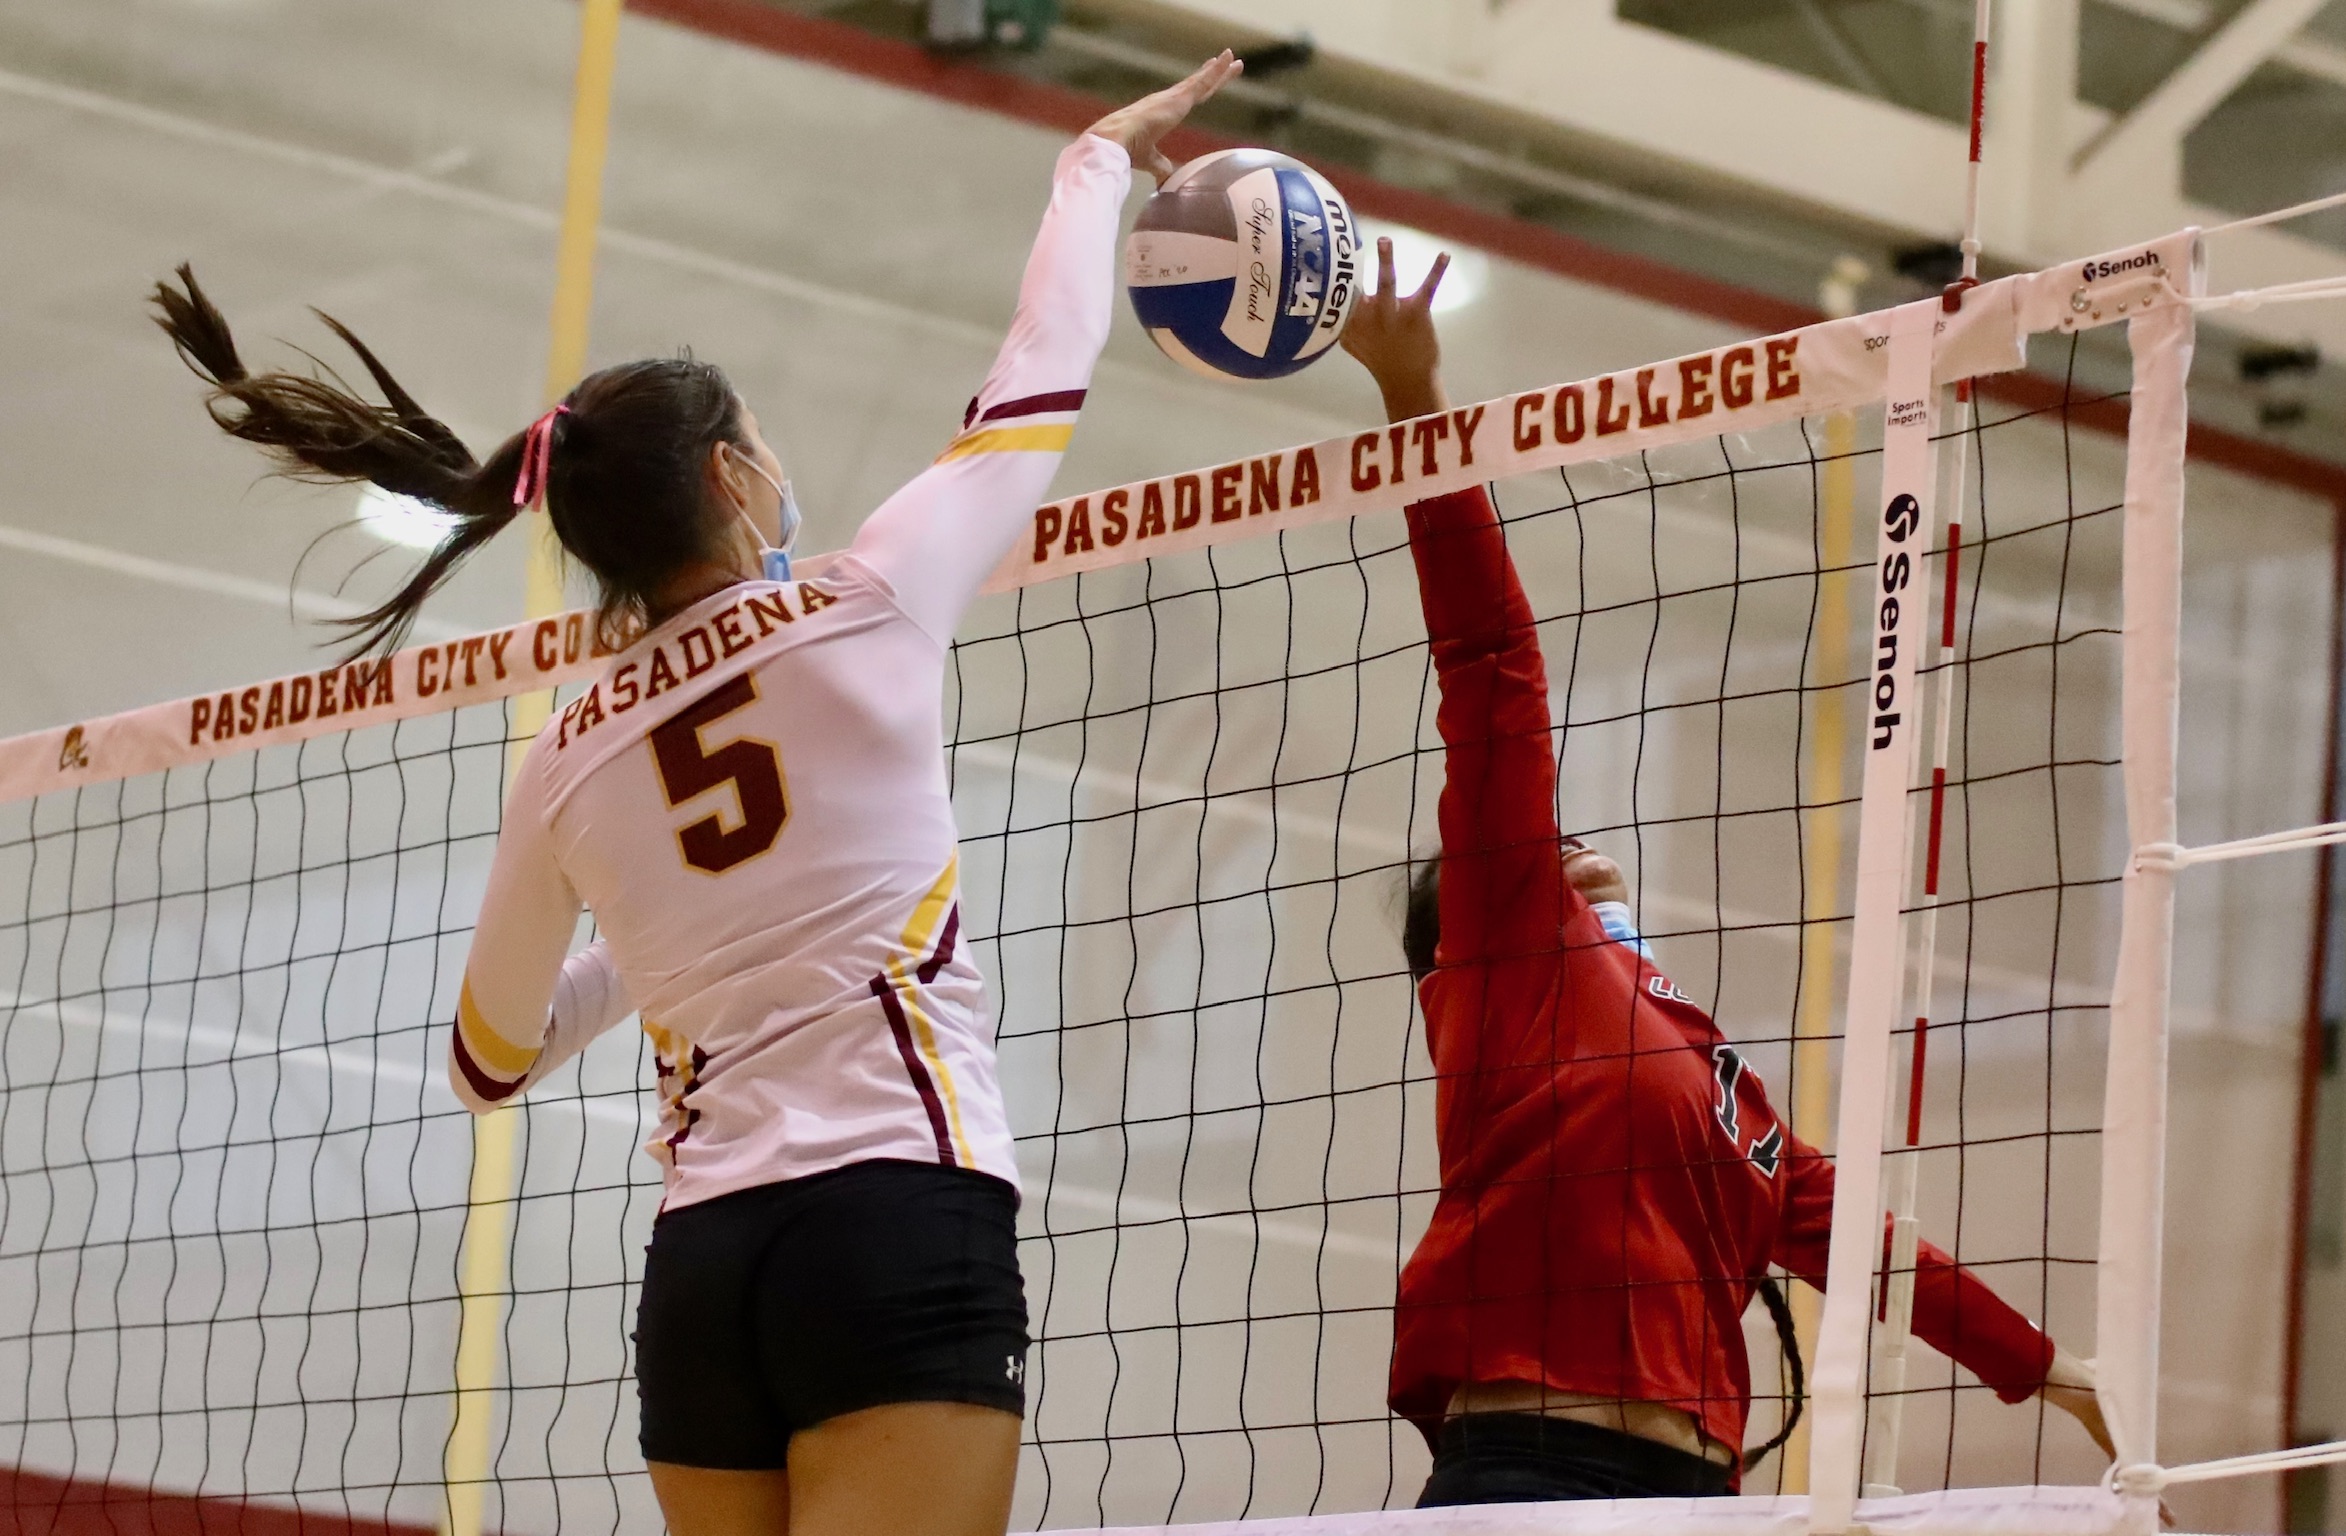 Camila Sanchez-Tellez (#5) with the attack at net during PCC's win over Long Beach Wednesday night at Hutto-Patterson Gymnasium (photo by Michael Watkins).